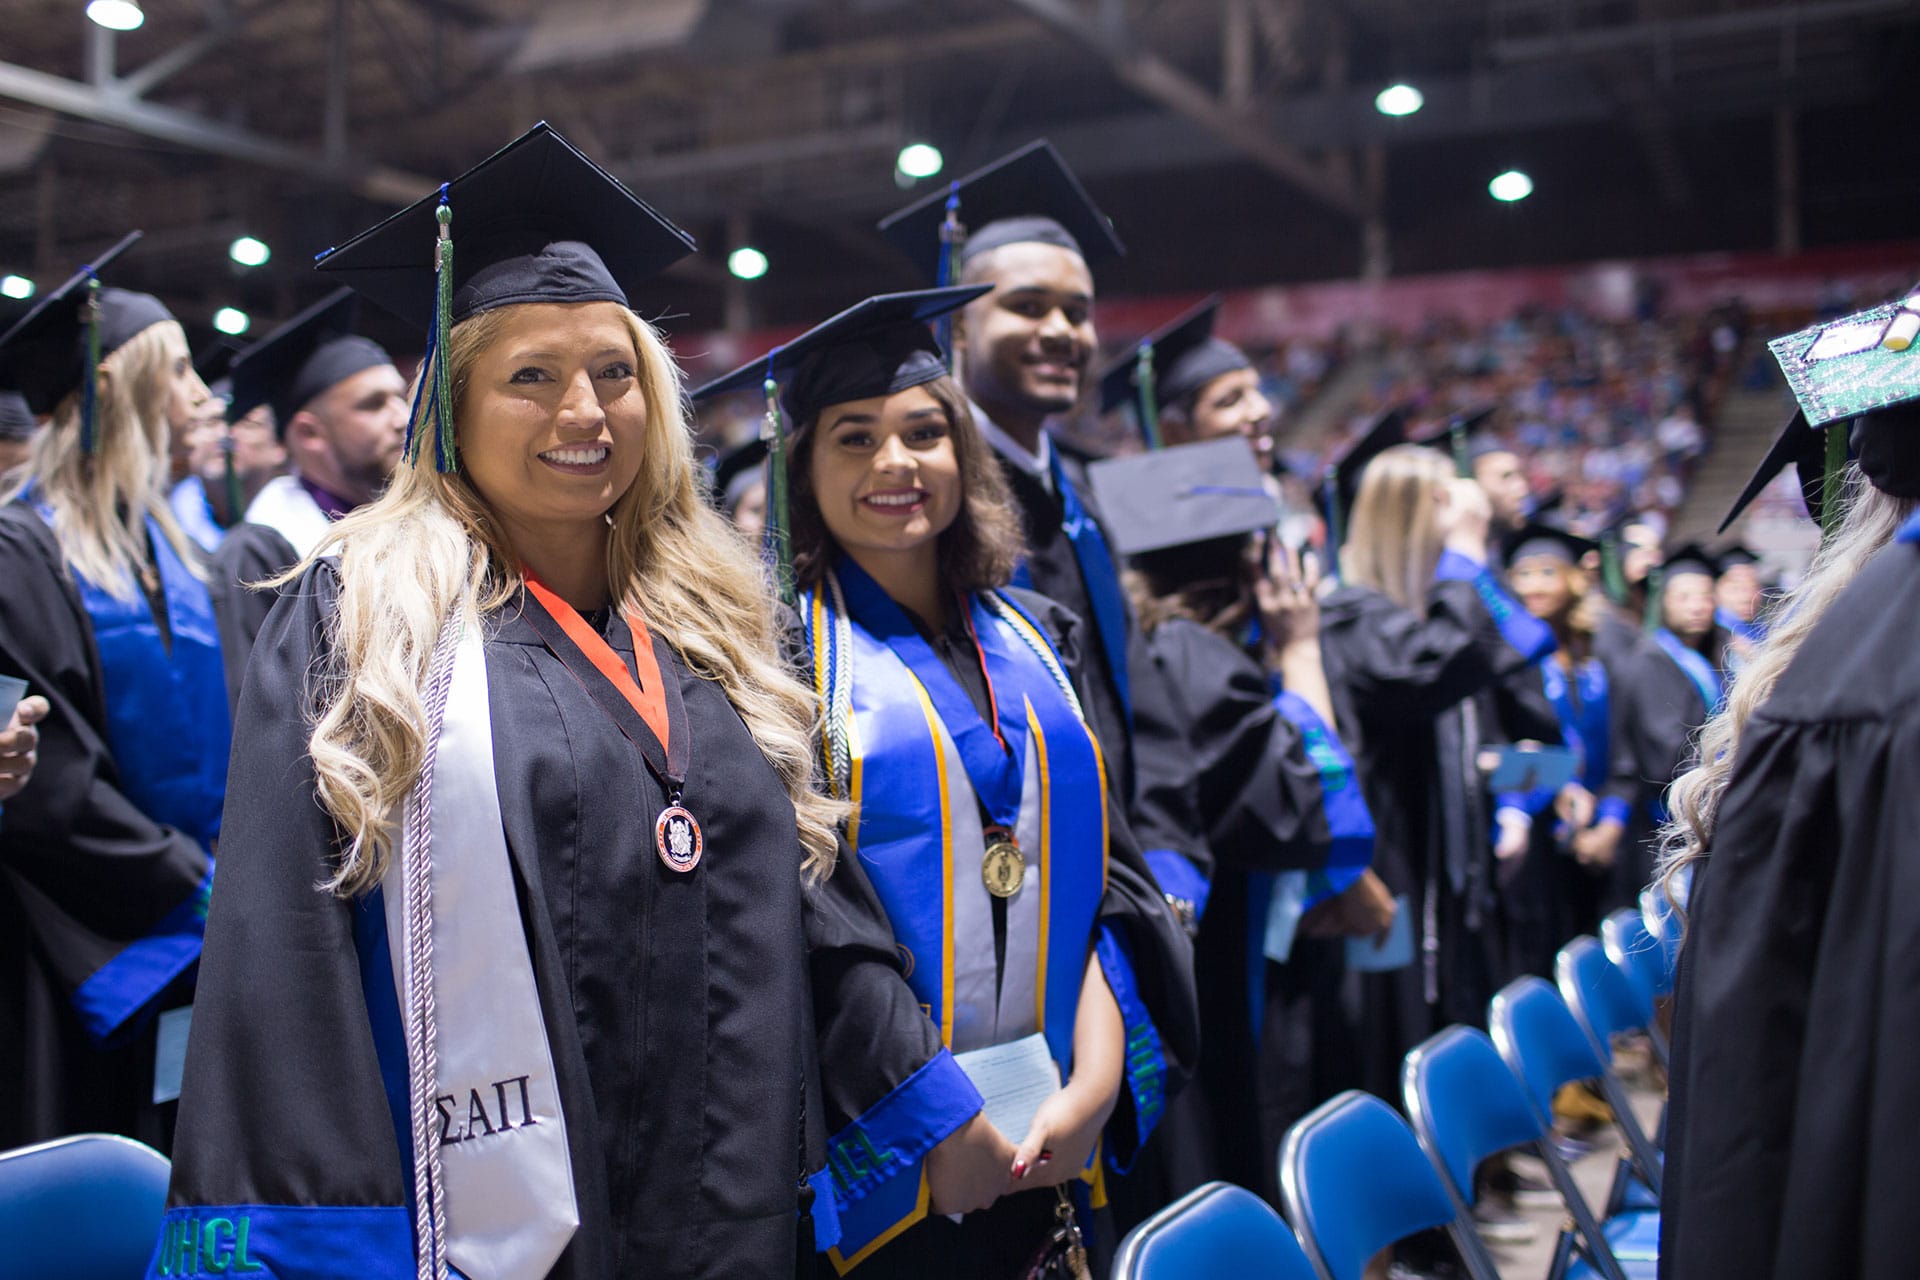 Nearly 1,100 UHCL grads walk at spring commencement